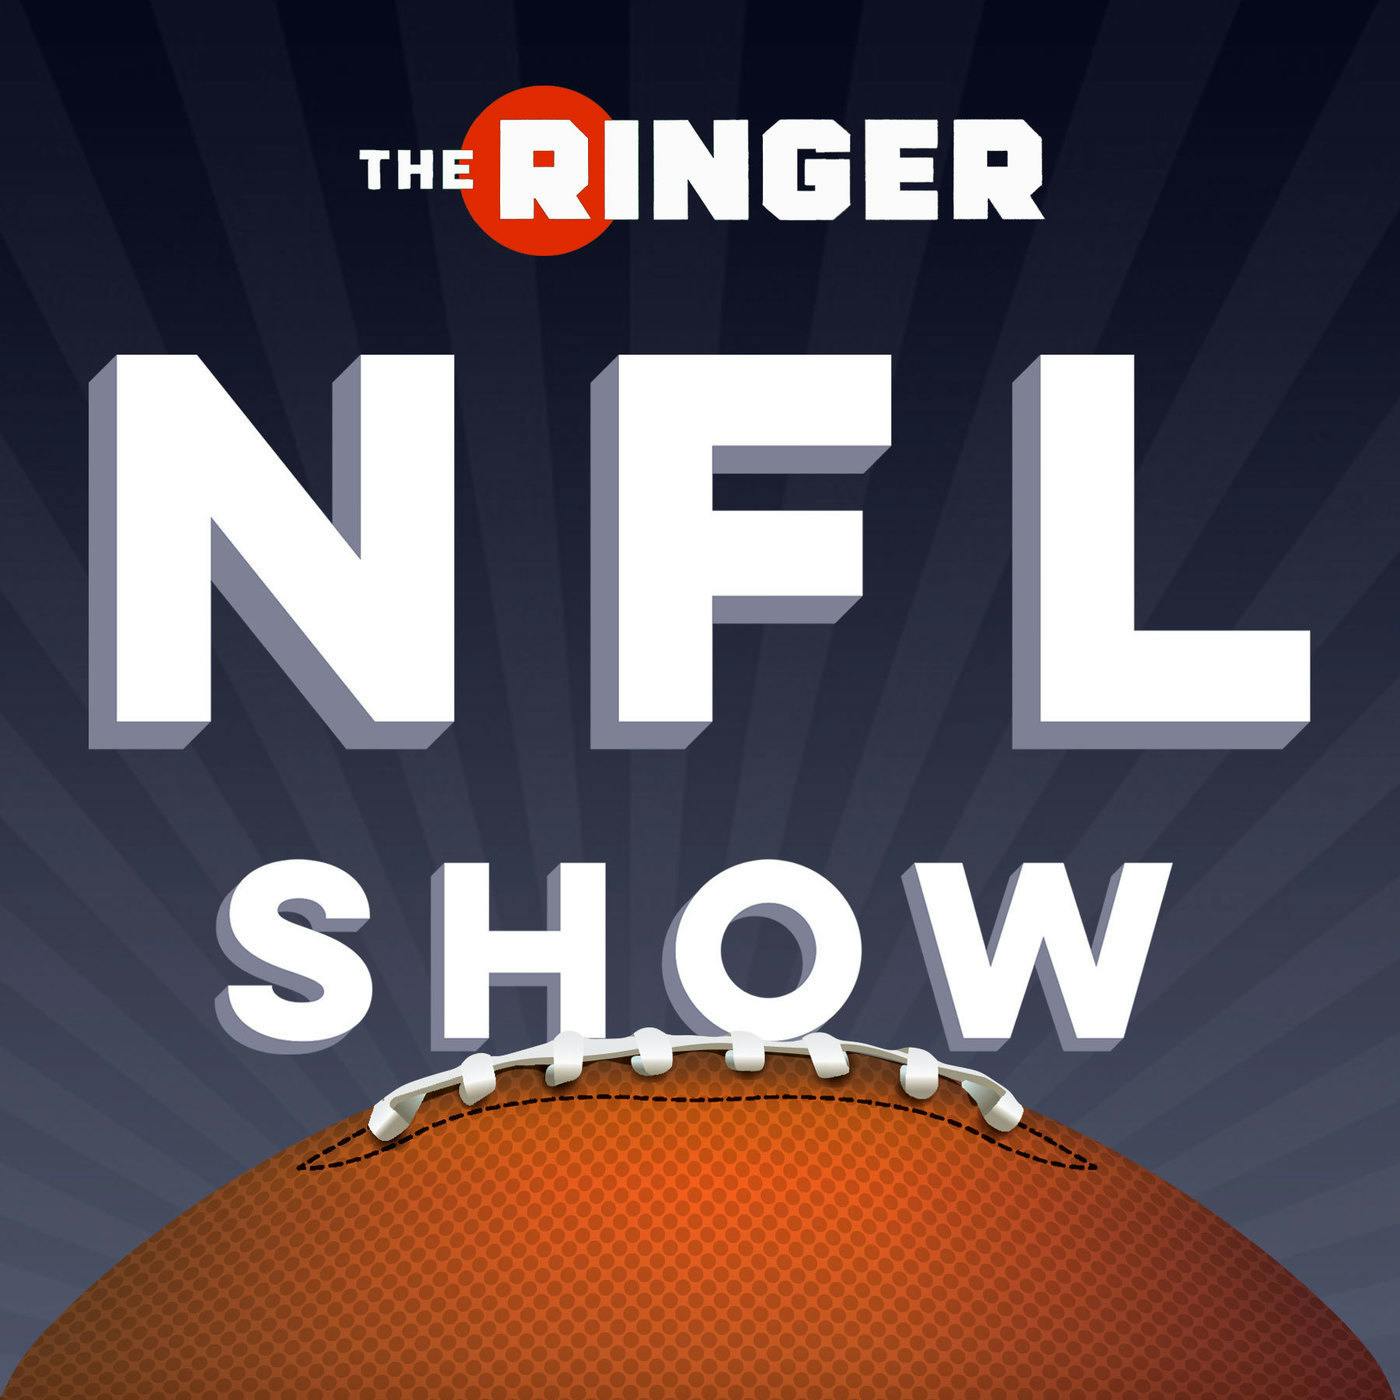 Tom Brady’s New Deal, Plus: Training Camp With the Chargers, Cowboys, and More | The Ringer NFL Show